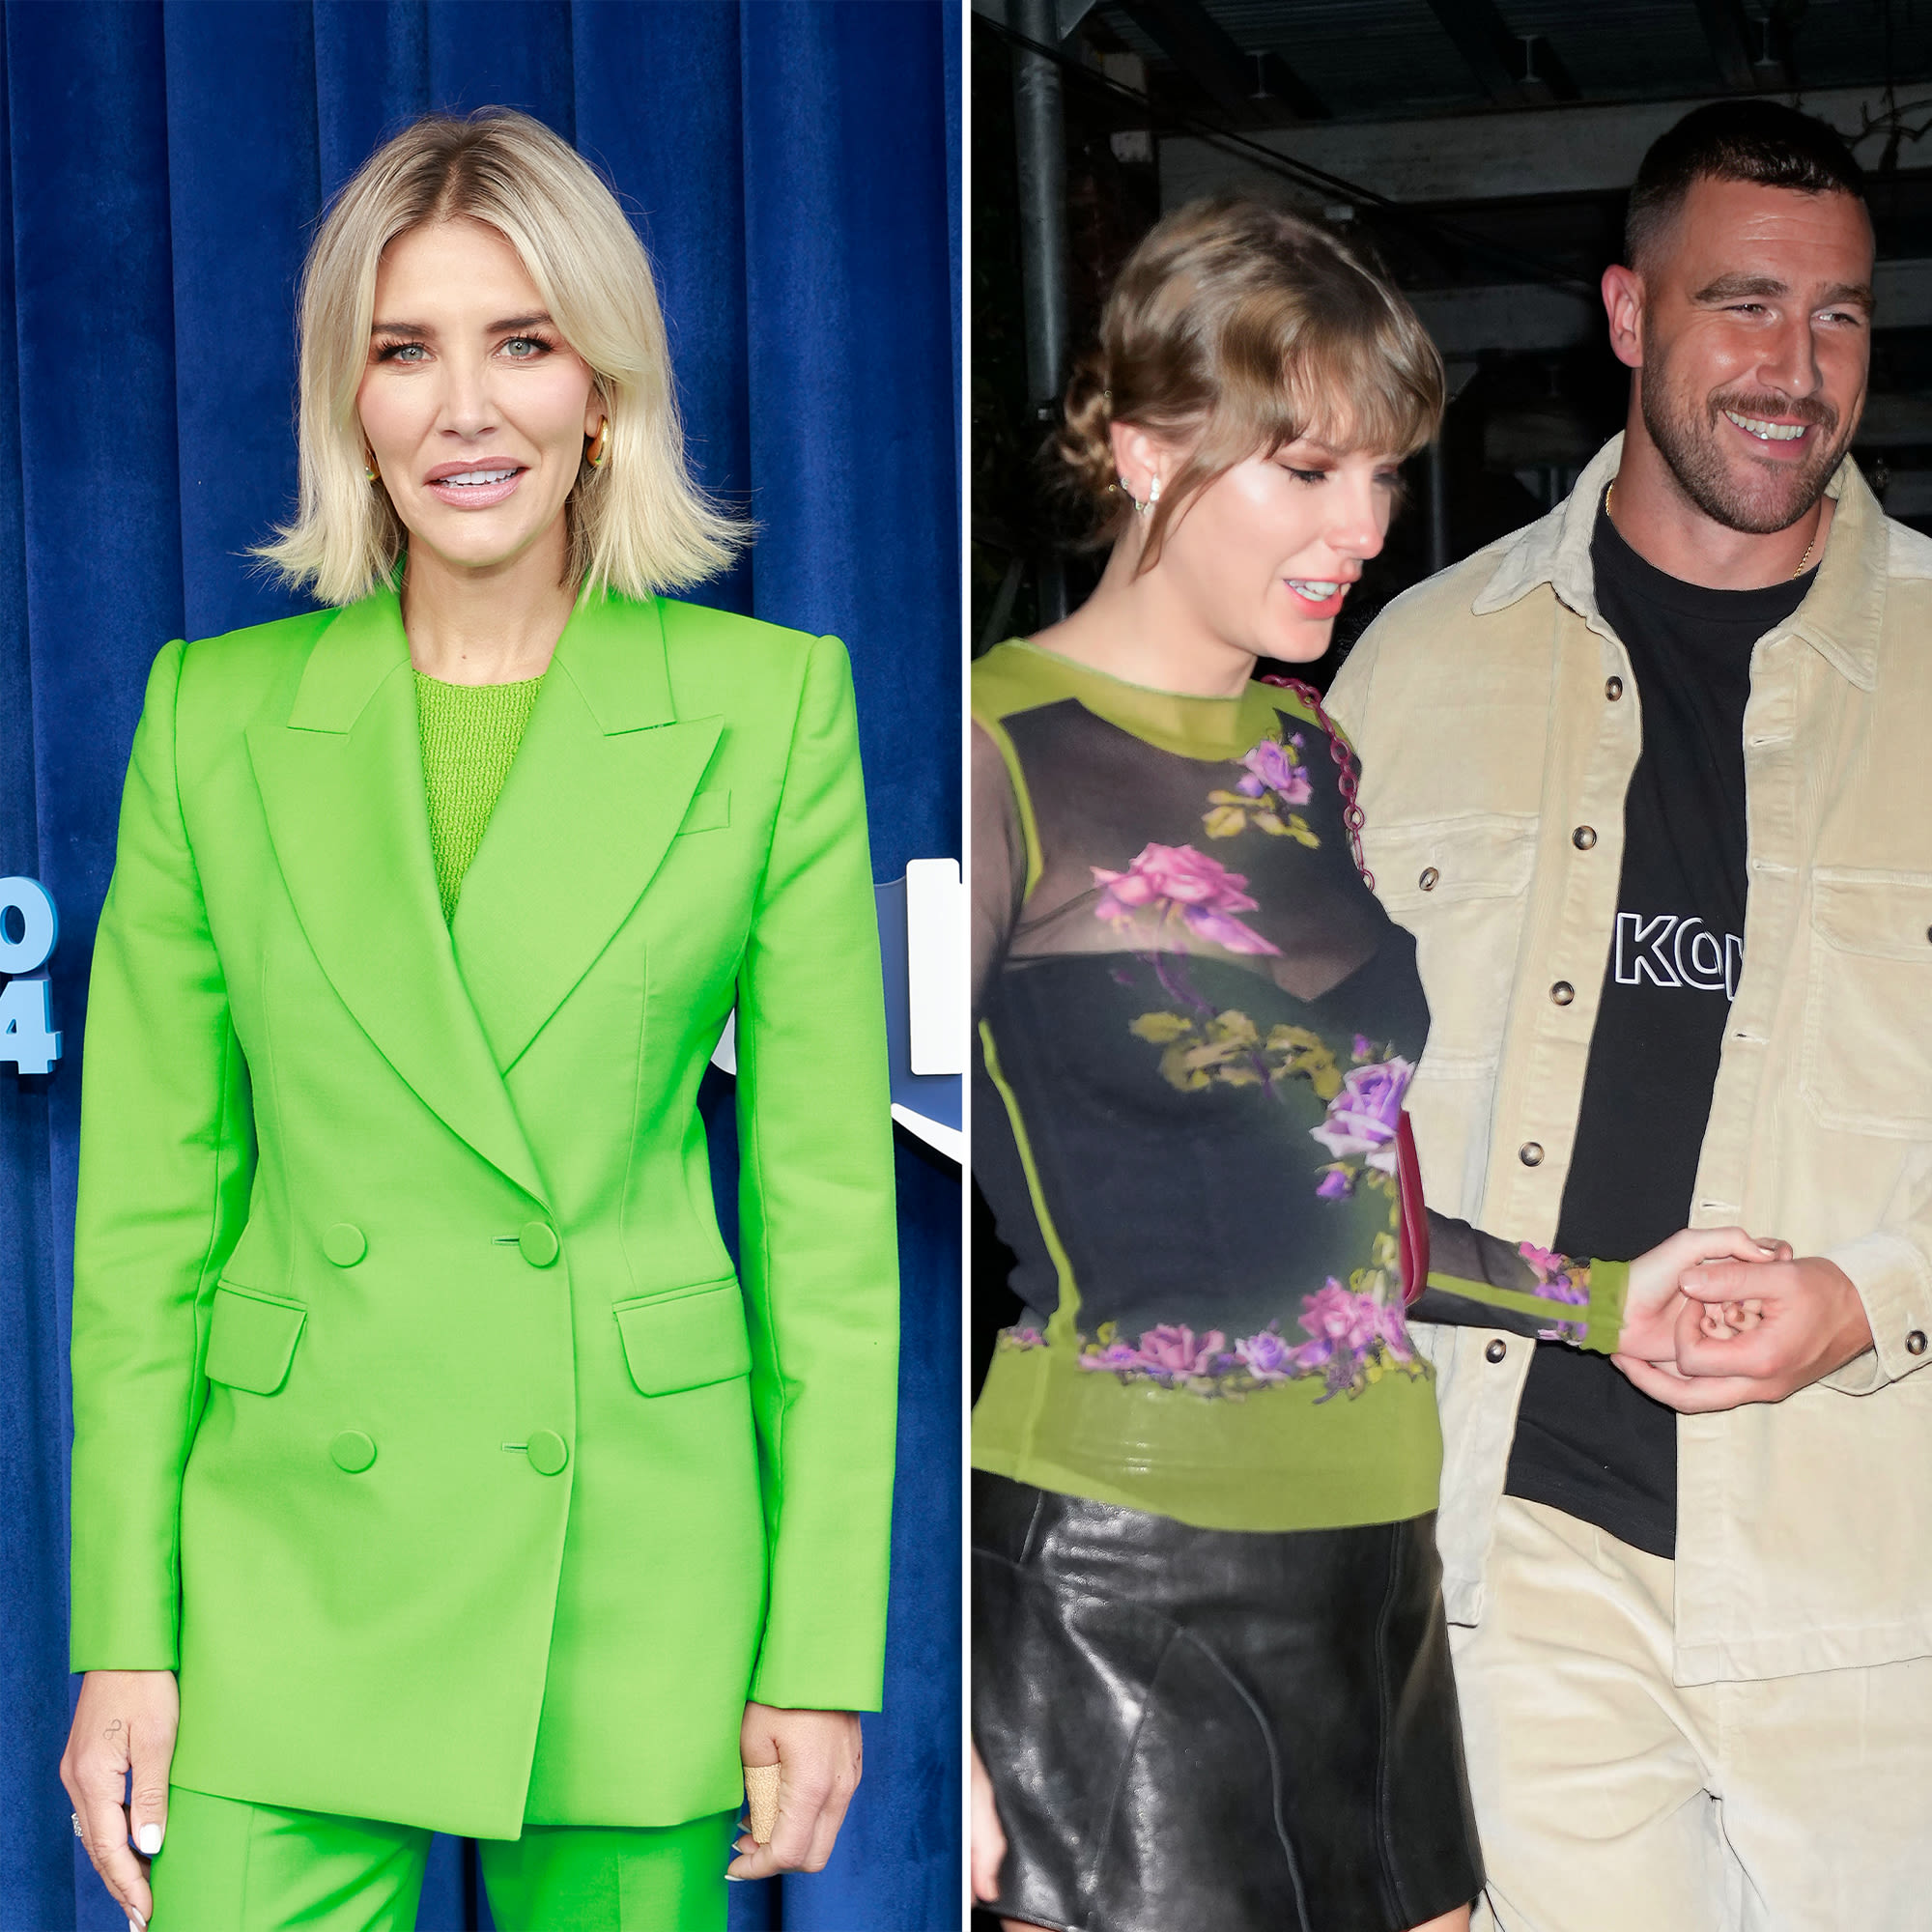 Sportscaster Charissa Thompson Is So Excited to See Friend Travis Kelce Happily Dating Taylor Swift